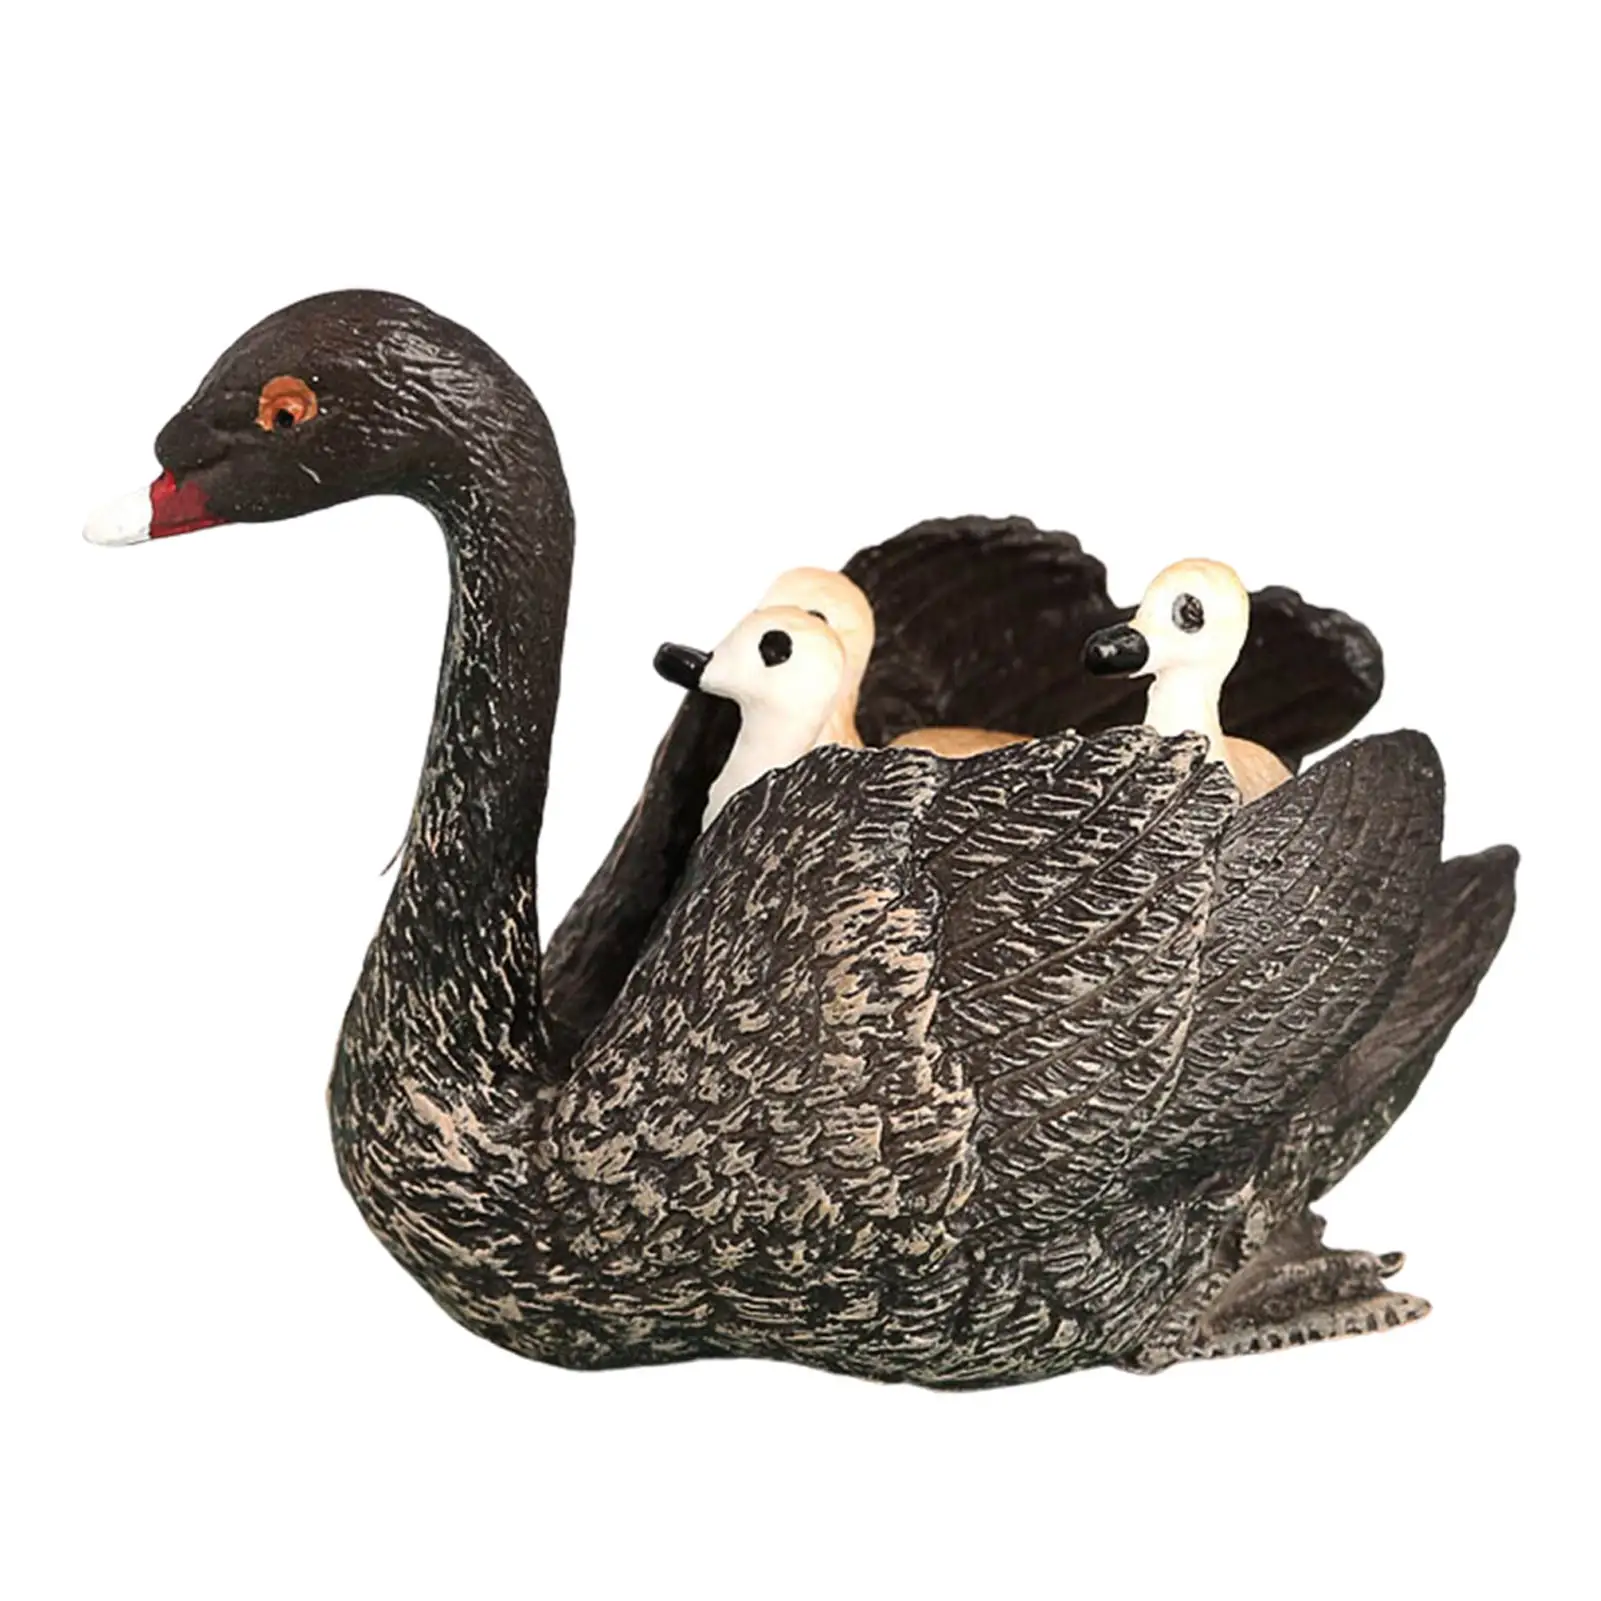 

Wildlife Animal Model Geese Figurine For Kids Preschool Animals Figures Educational Project Diorama Model Toy For Kids